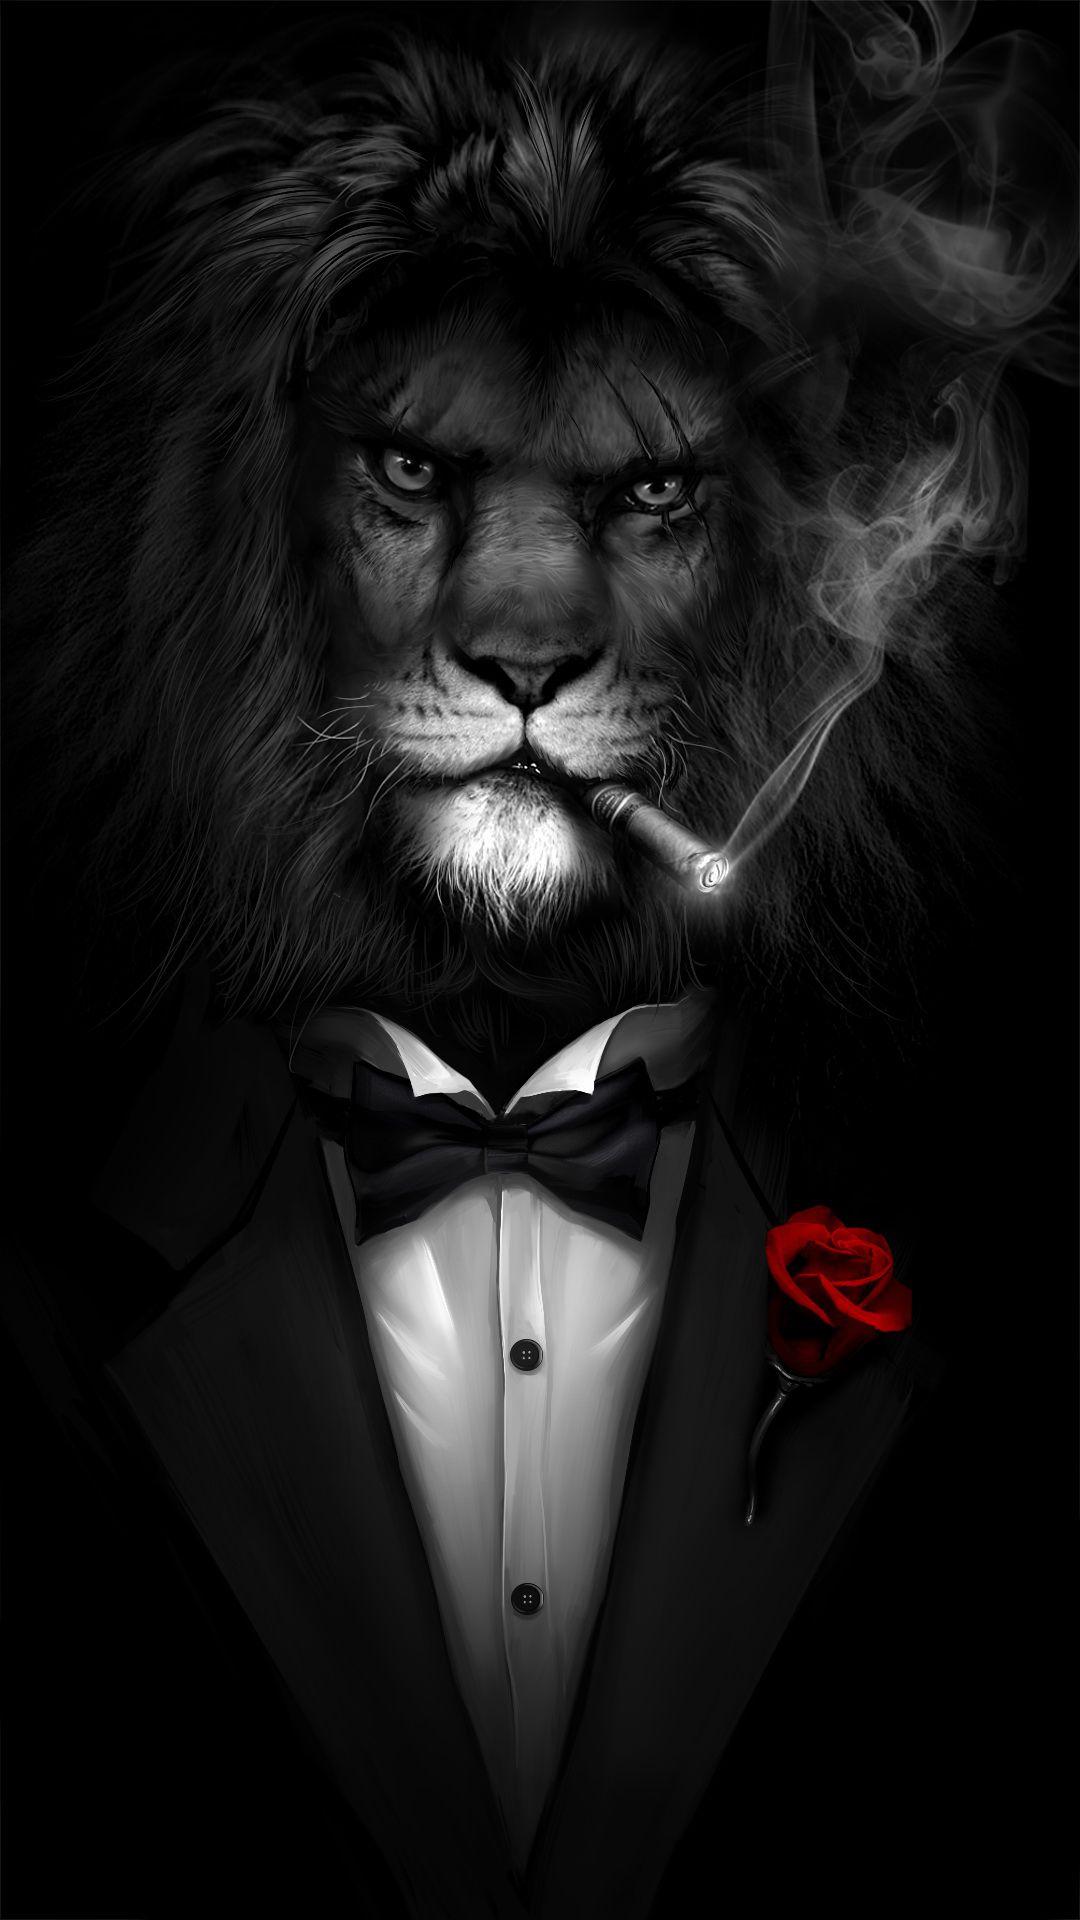 Lion in a black suit， very cool live wallpaper!. Android live